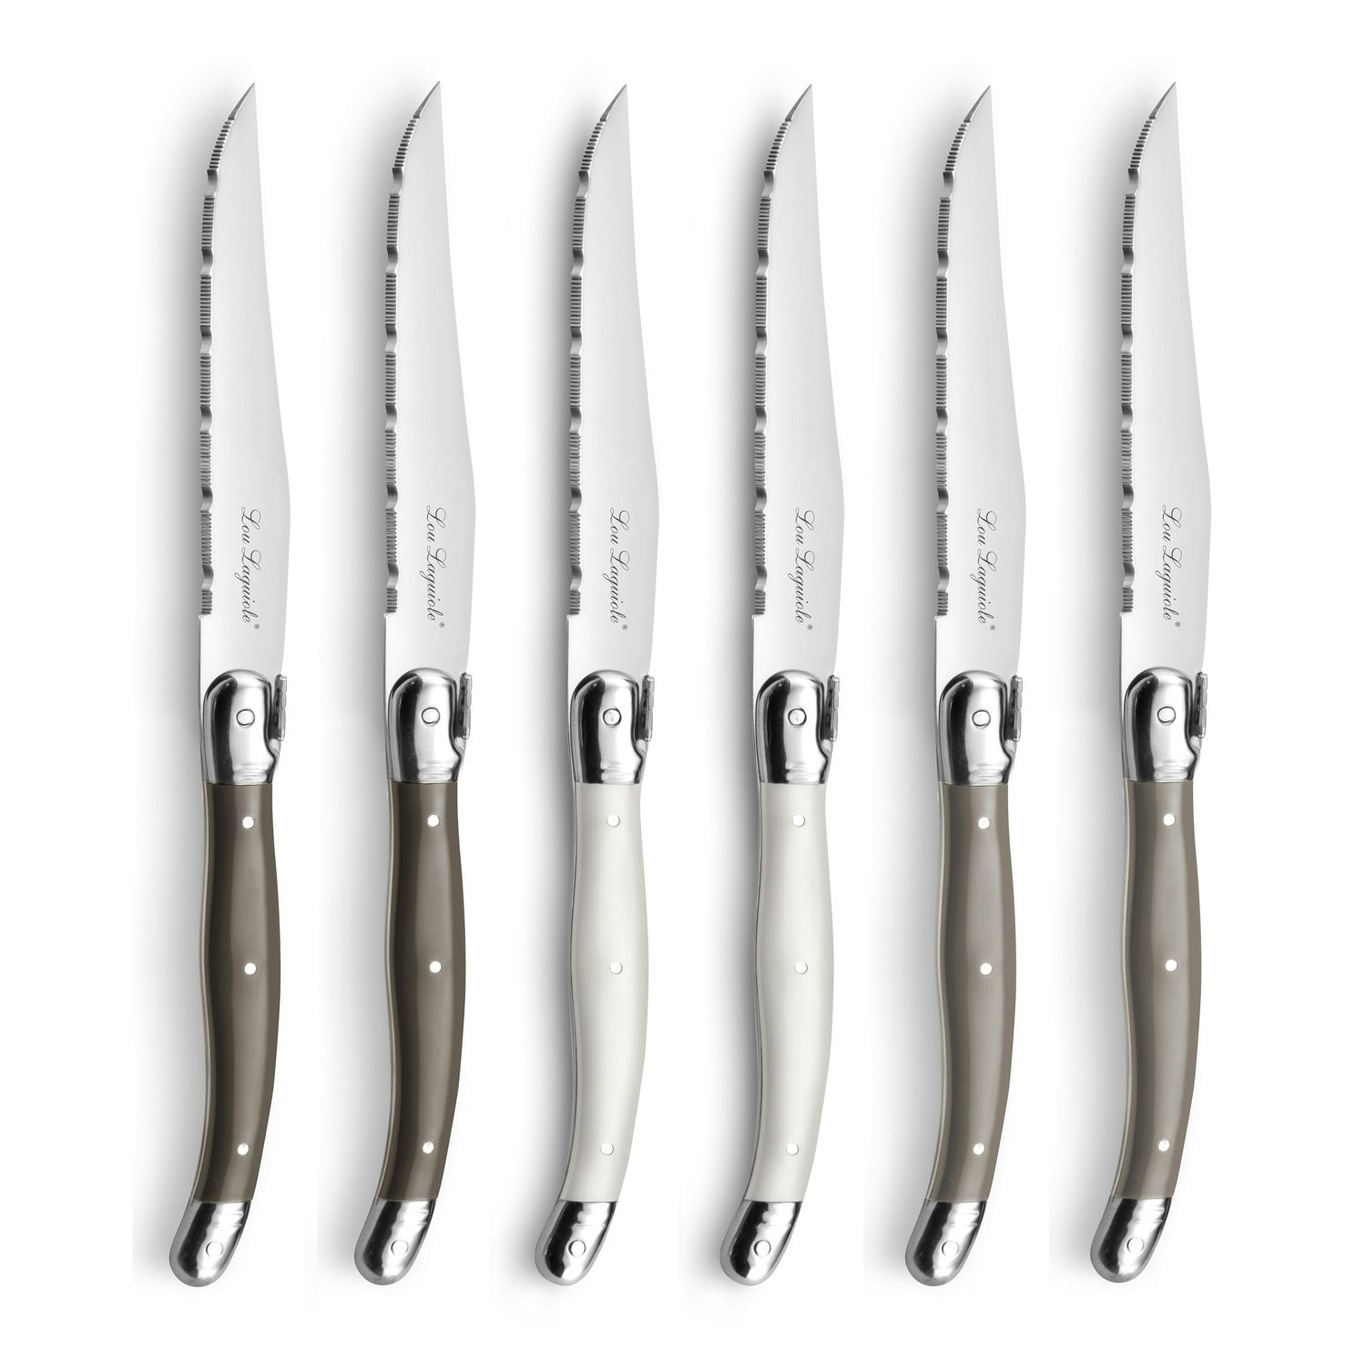 https://royaldesign.com/image/2/lou-laguiole-tradition-grill-knives-with-box-6-pack-2?w=800&quality=80